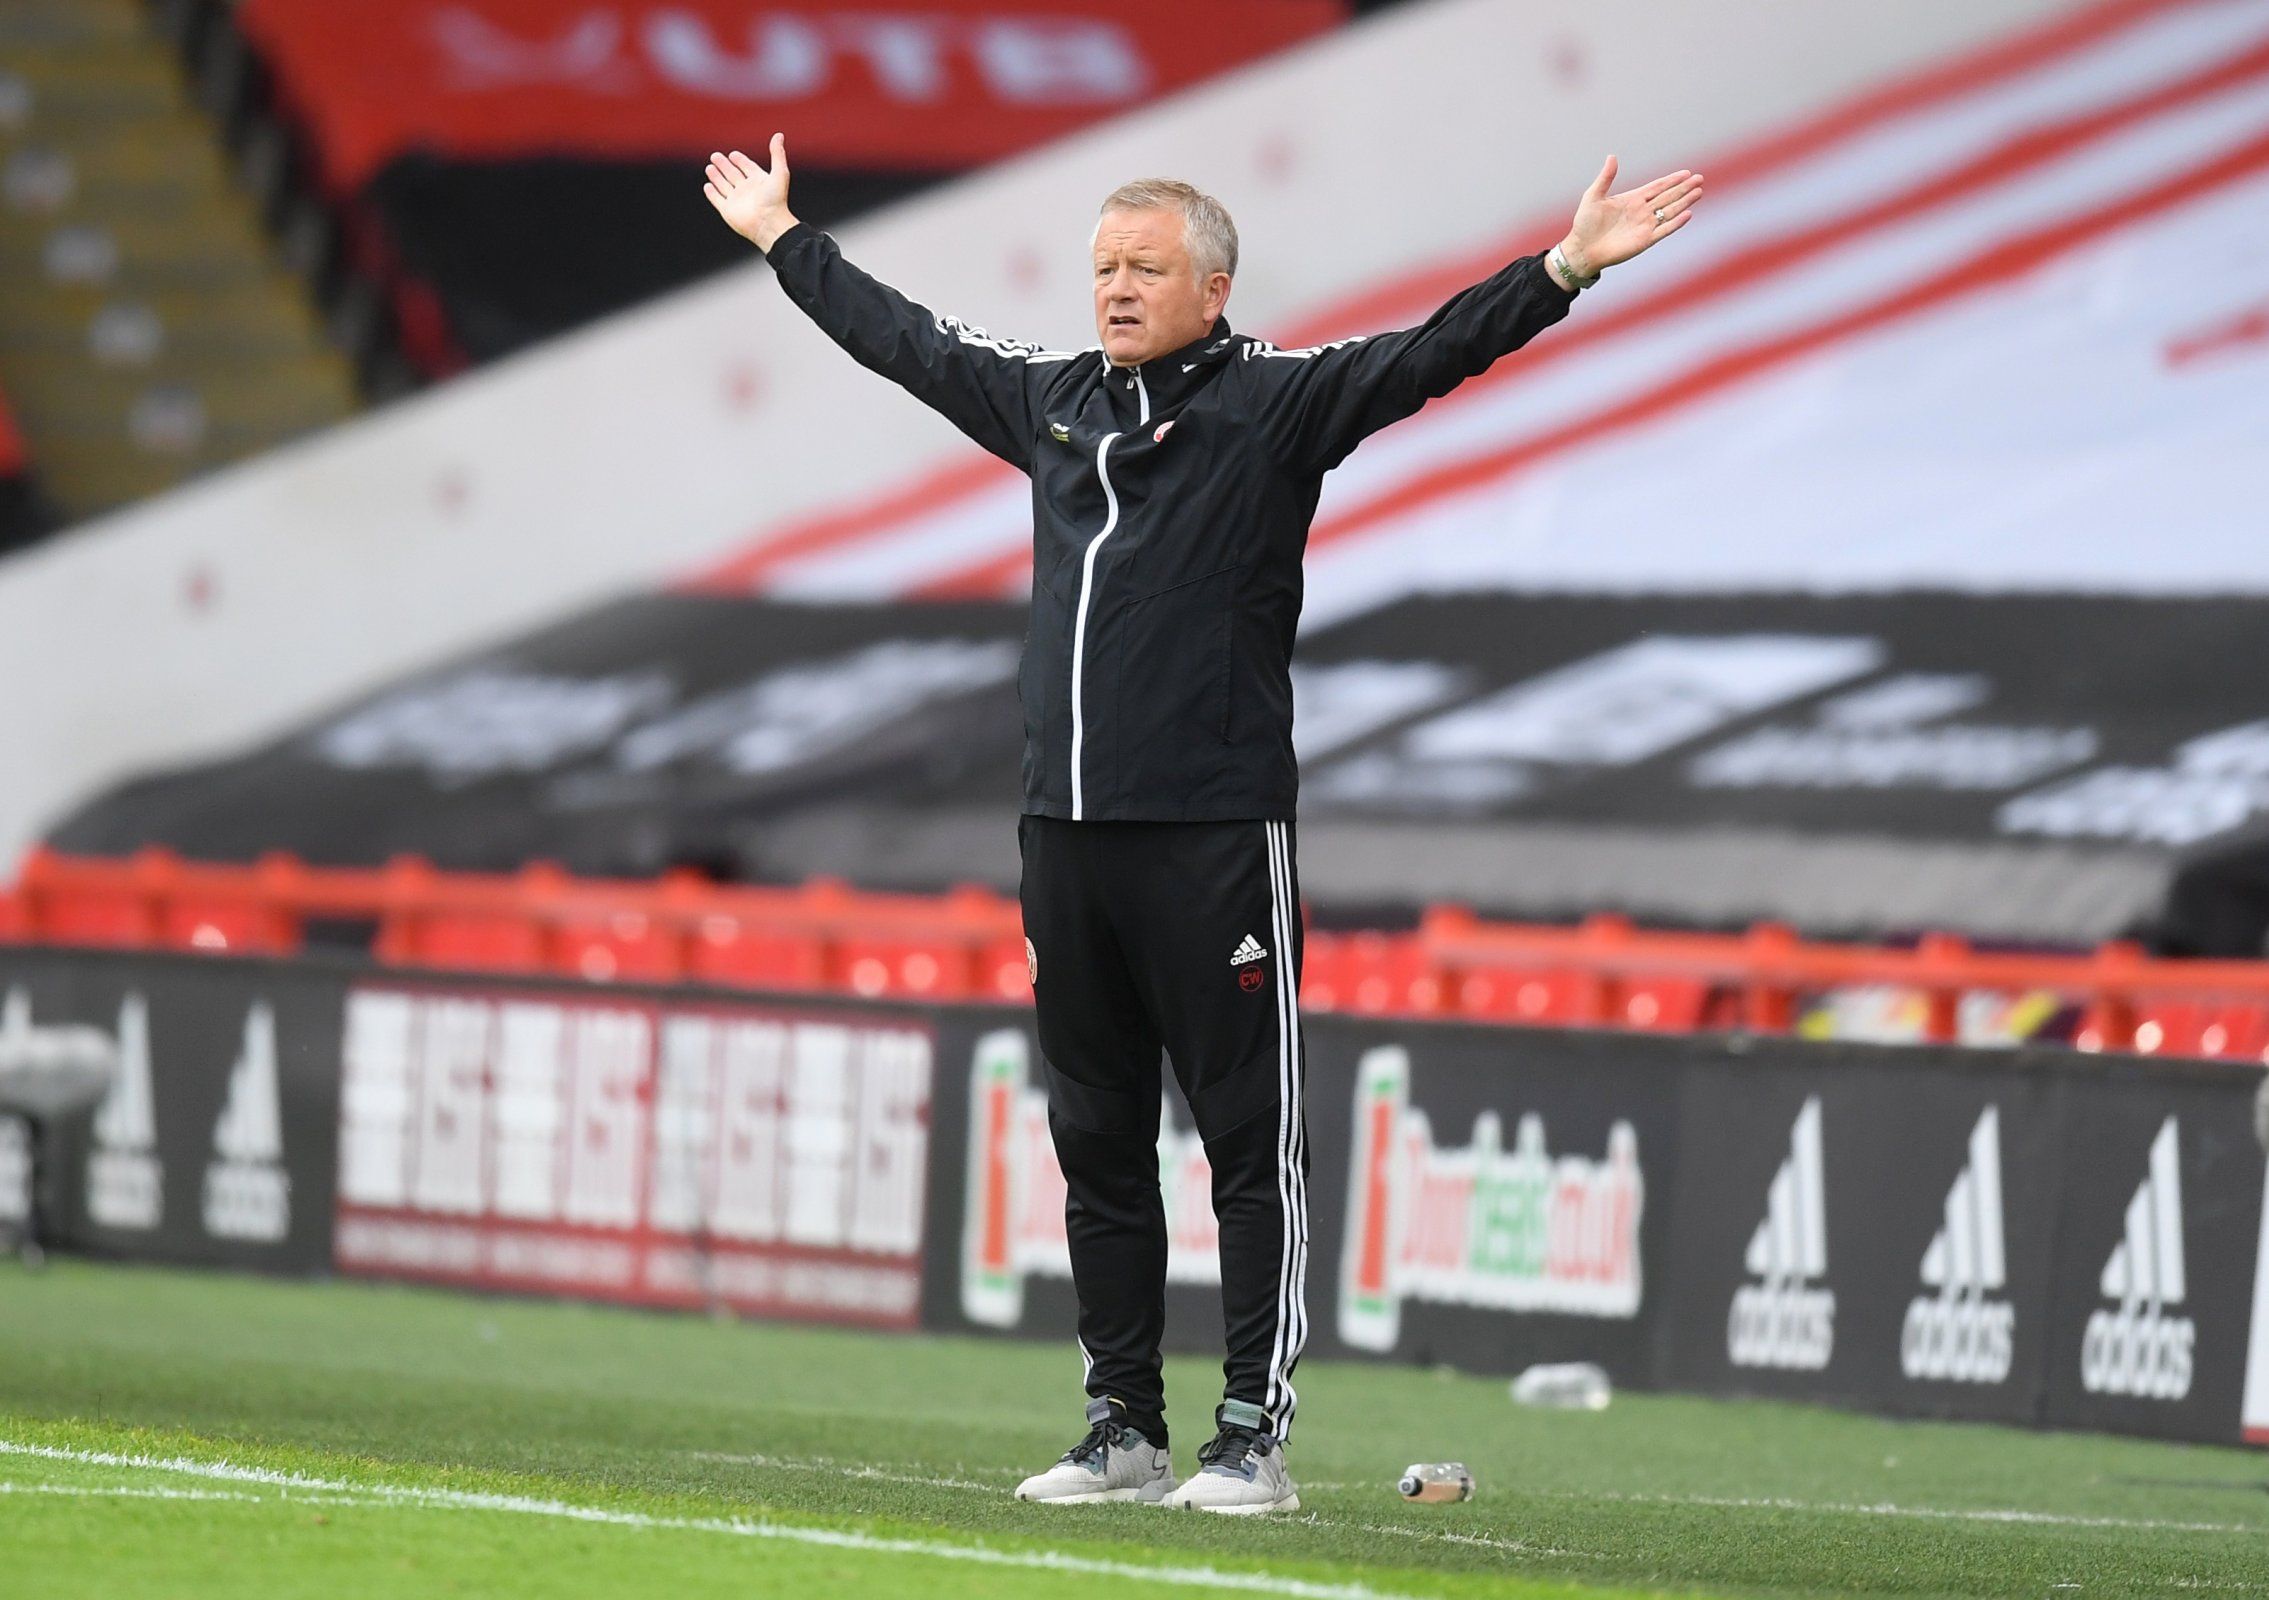 sheffield united manager chris wilder on sideline against spurs in the premier league